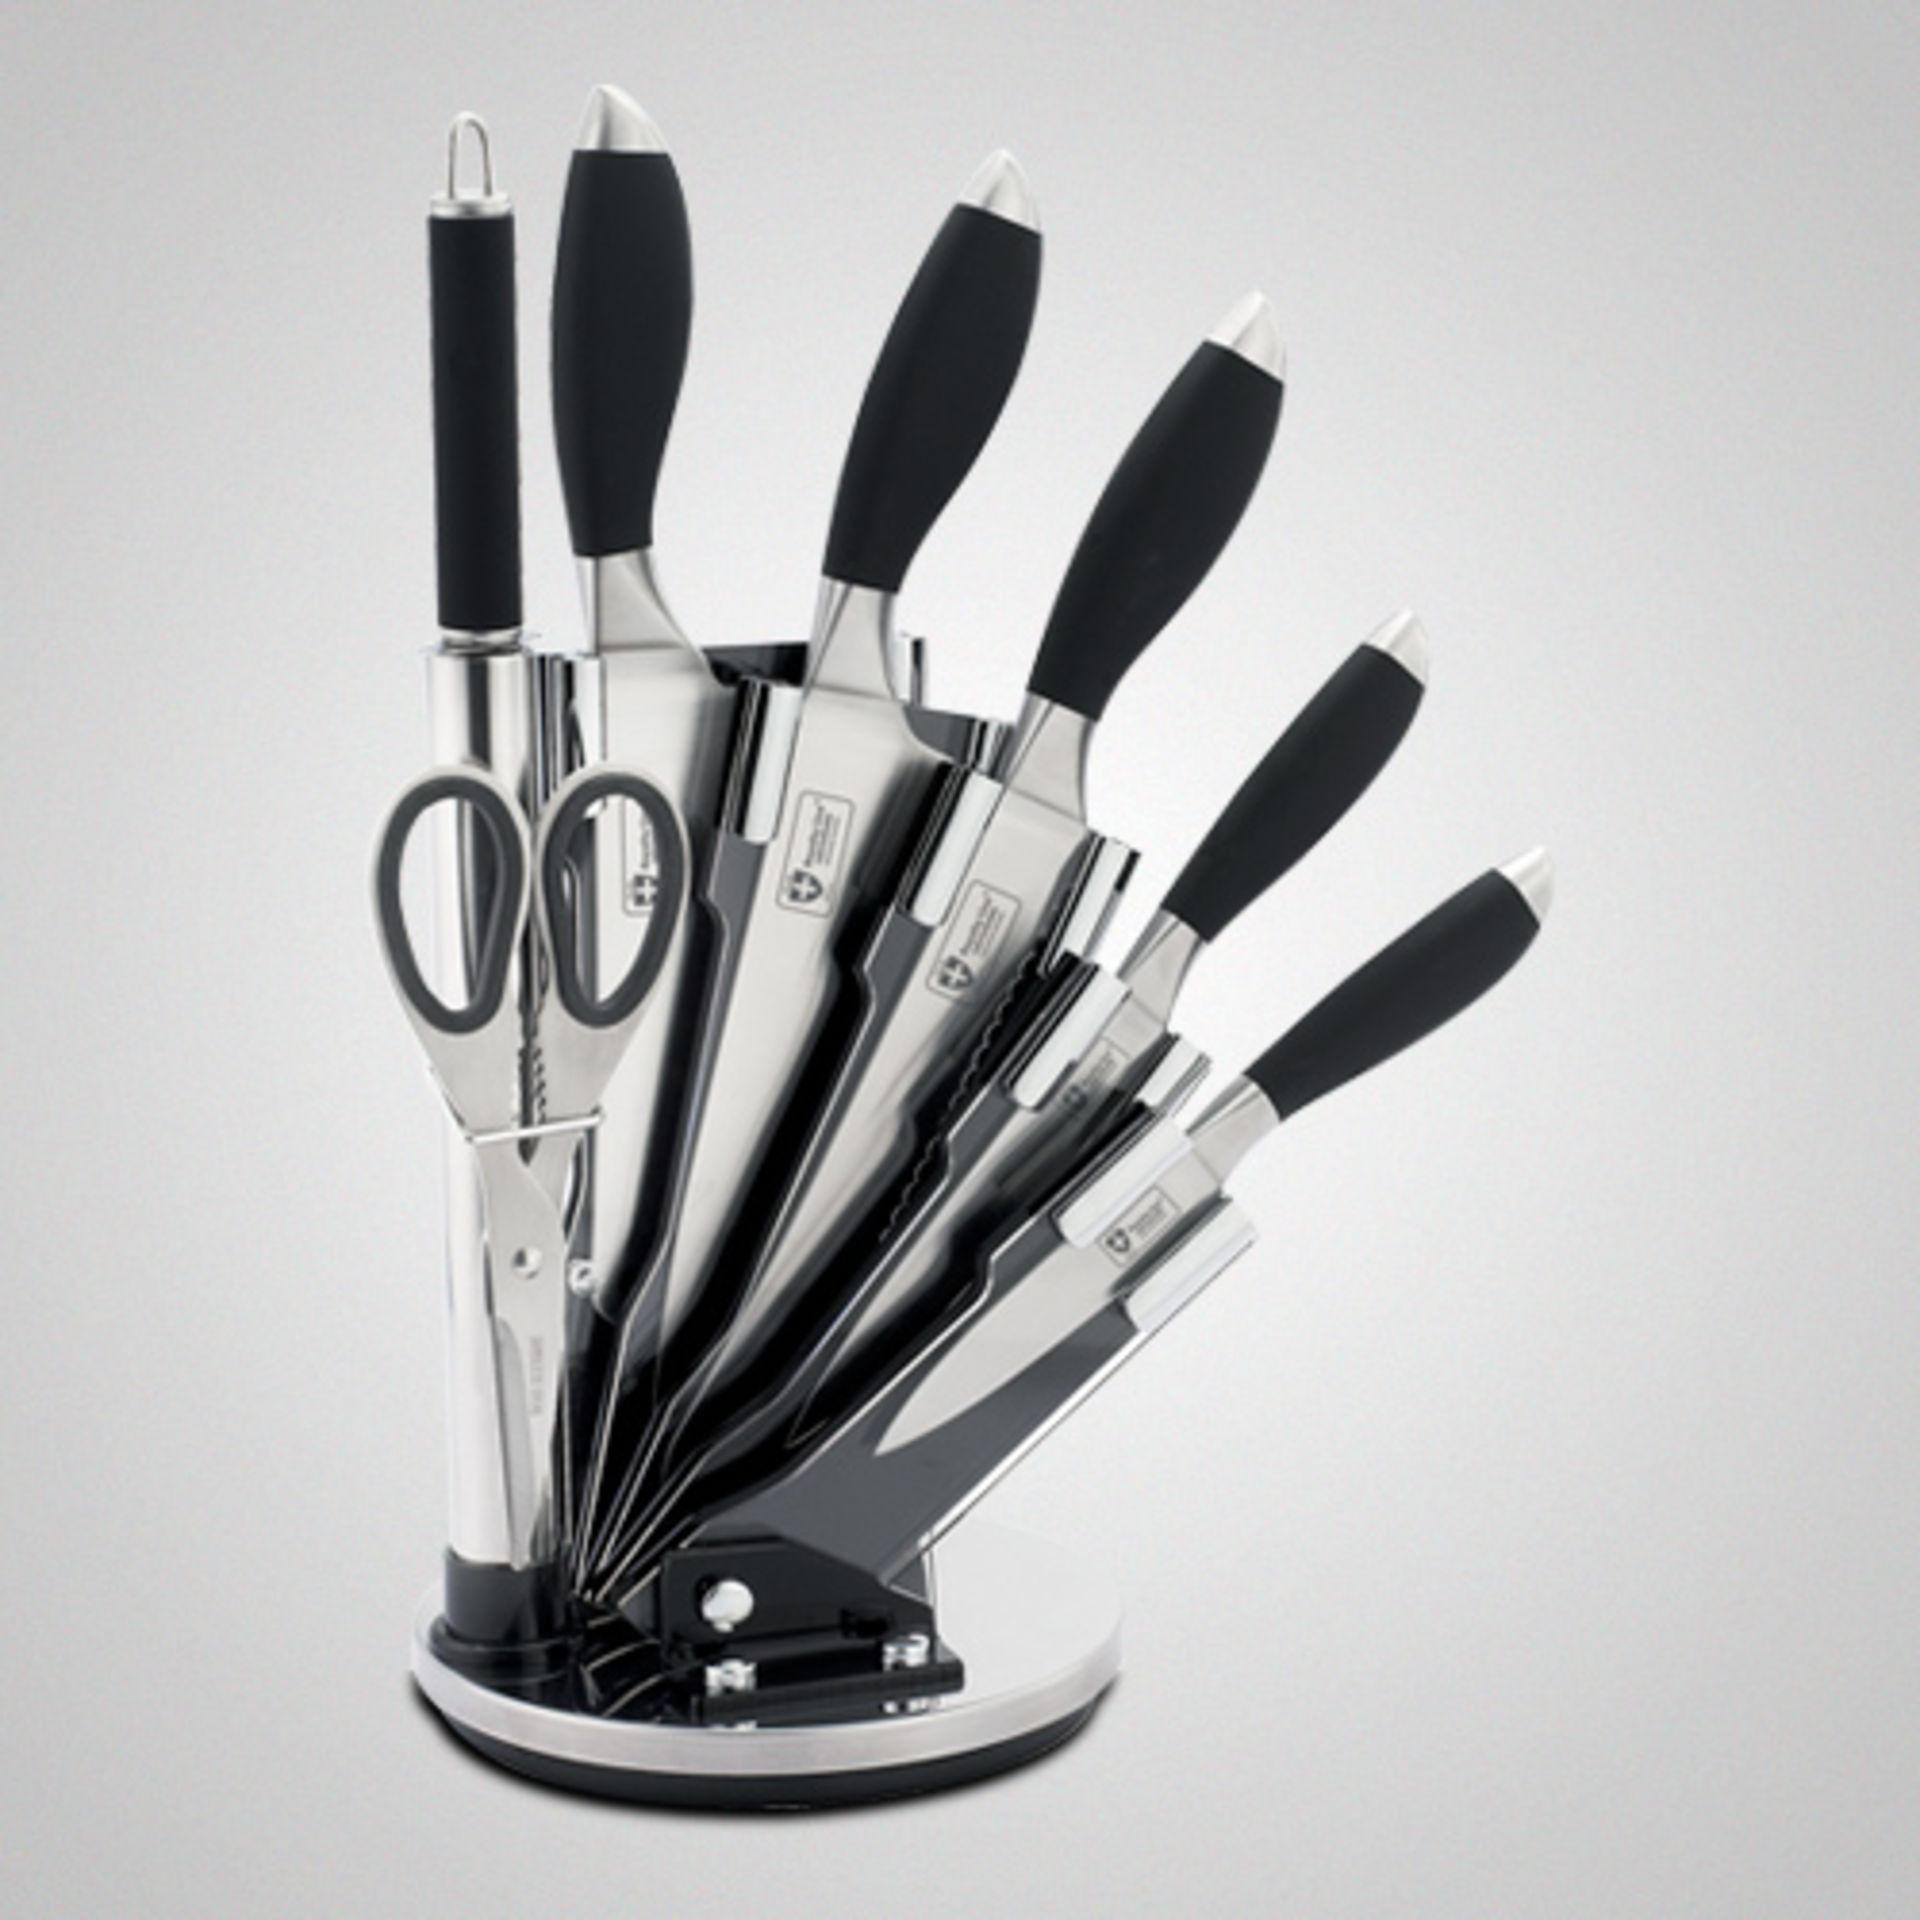 V Brand New Royalty 8Pc Knife Set with Swivel Stand inc Cleaver - Chef Knife - Bread Knife - Utility